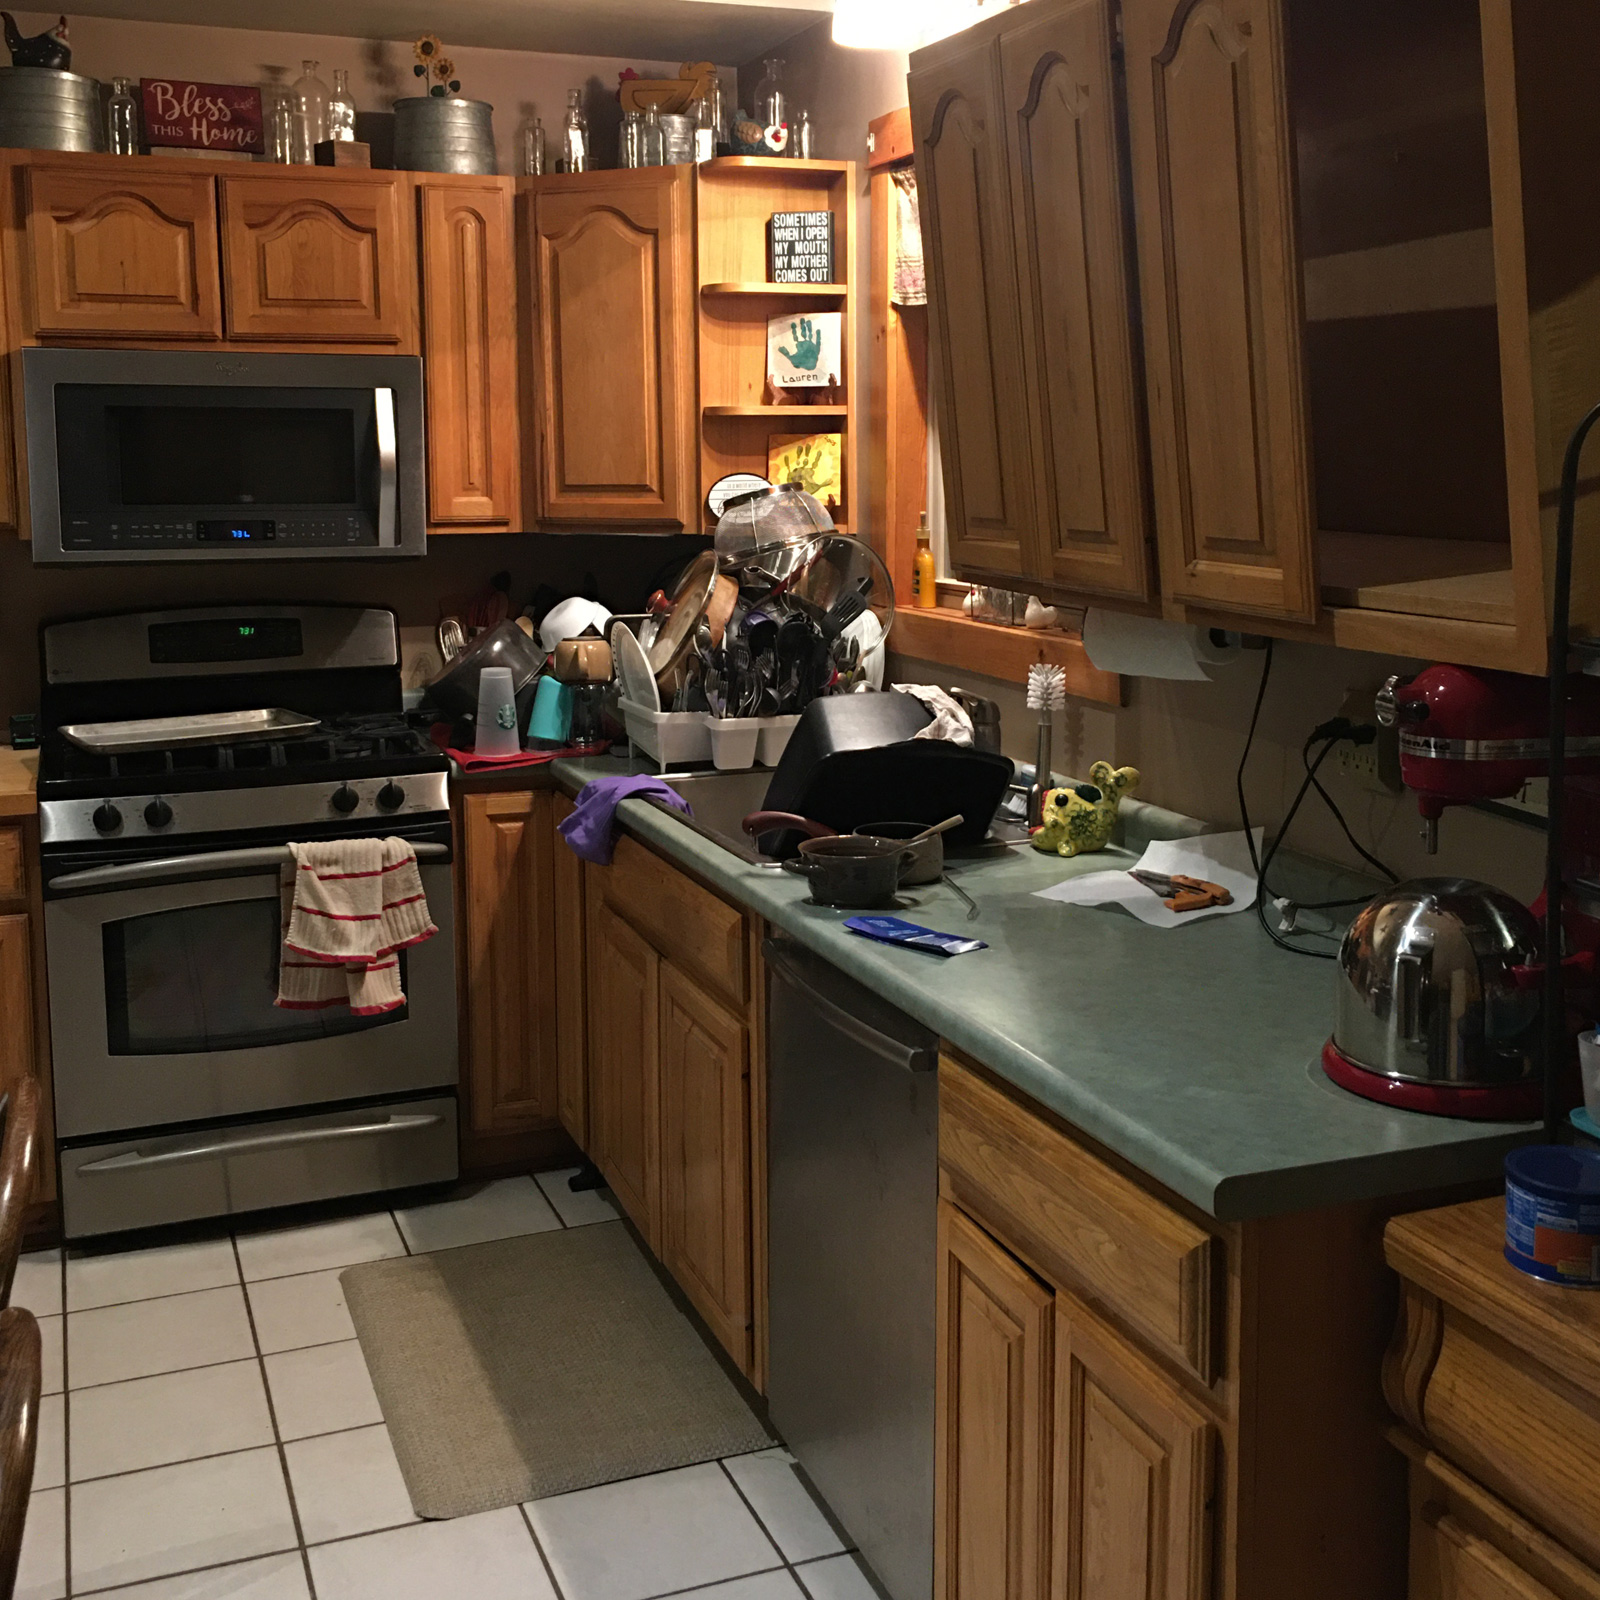 Entry 193 - Cheap kitchen cabinetry is causing some big problems